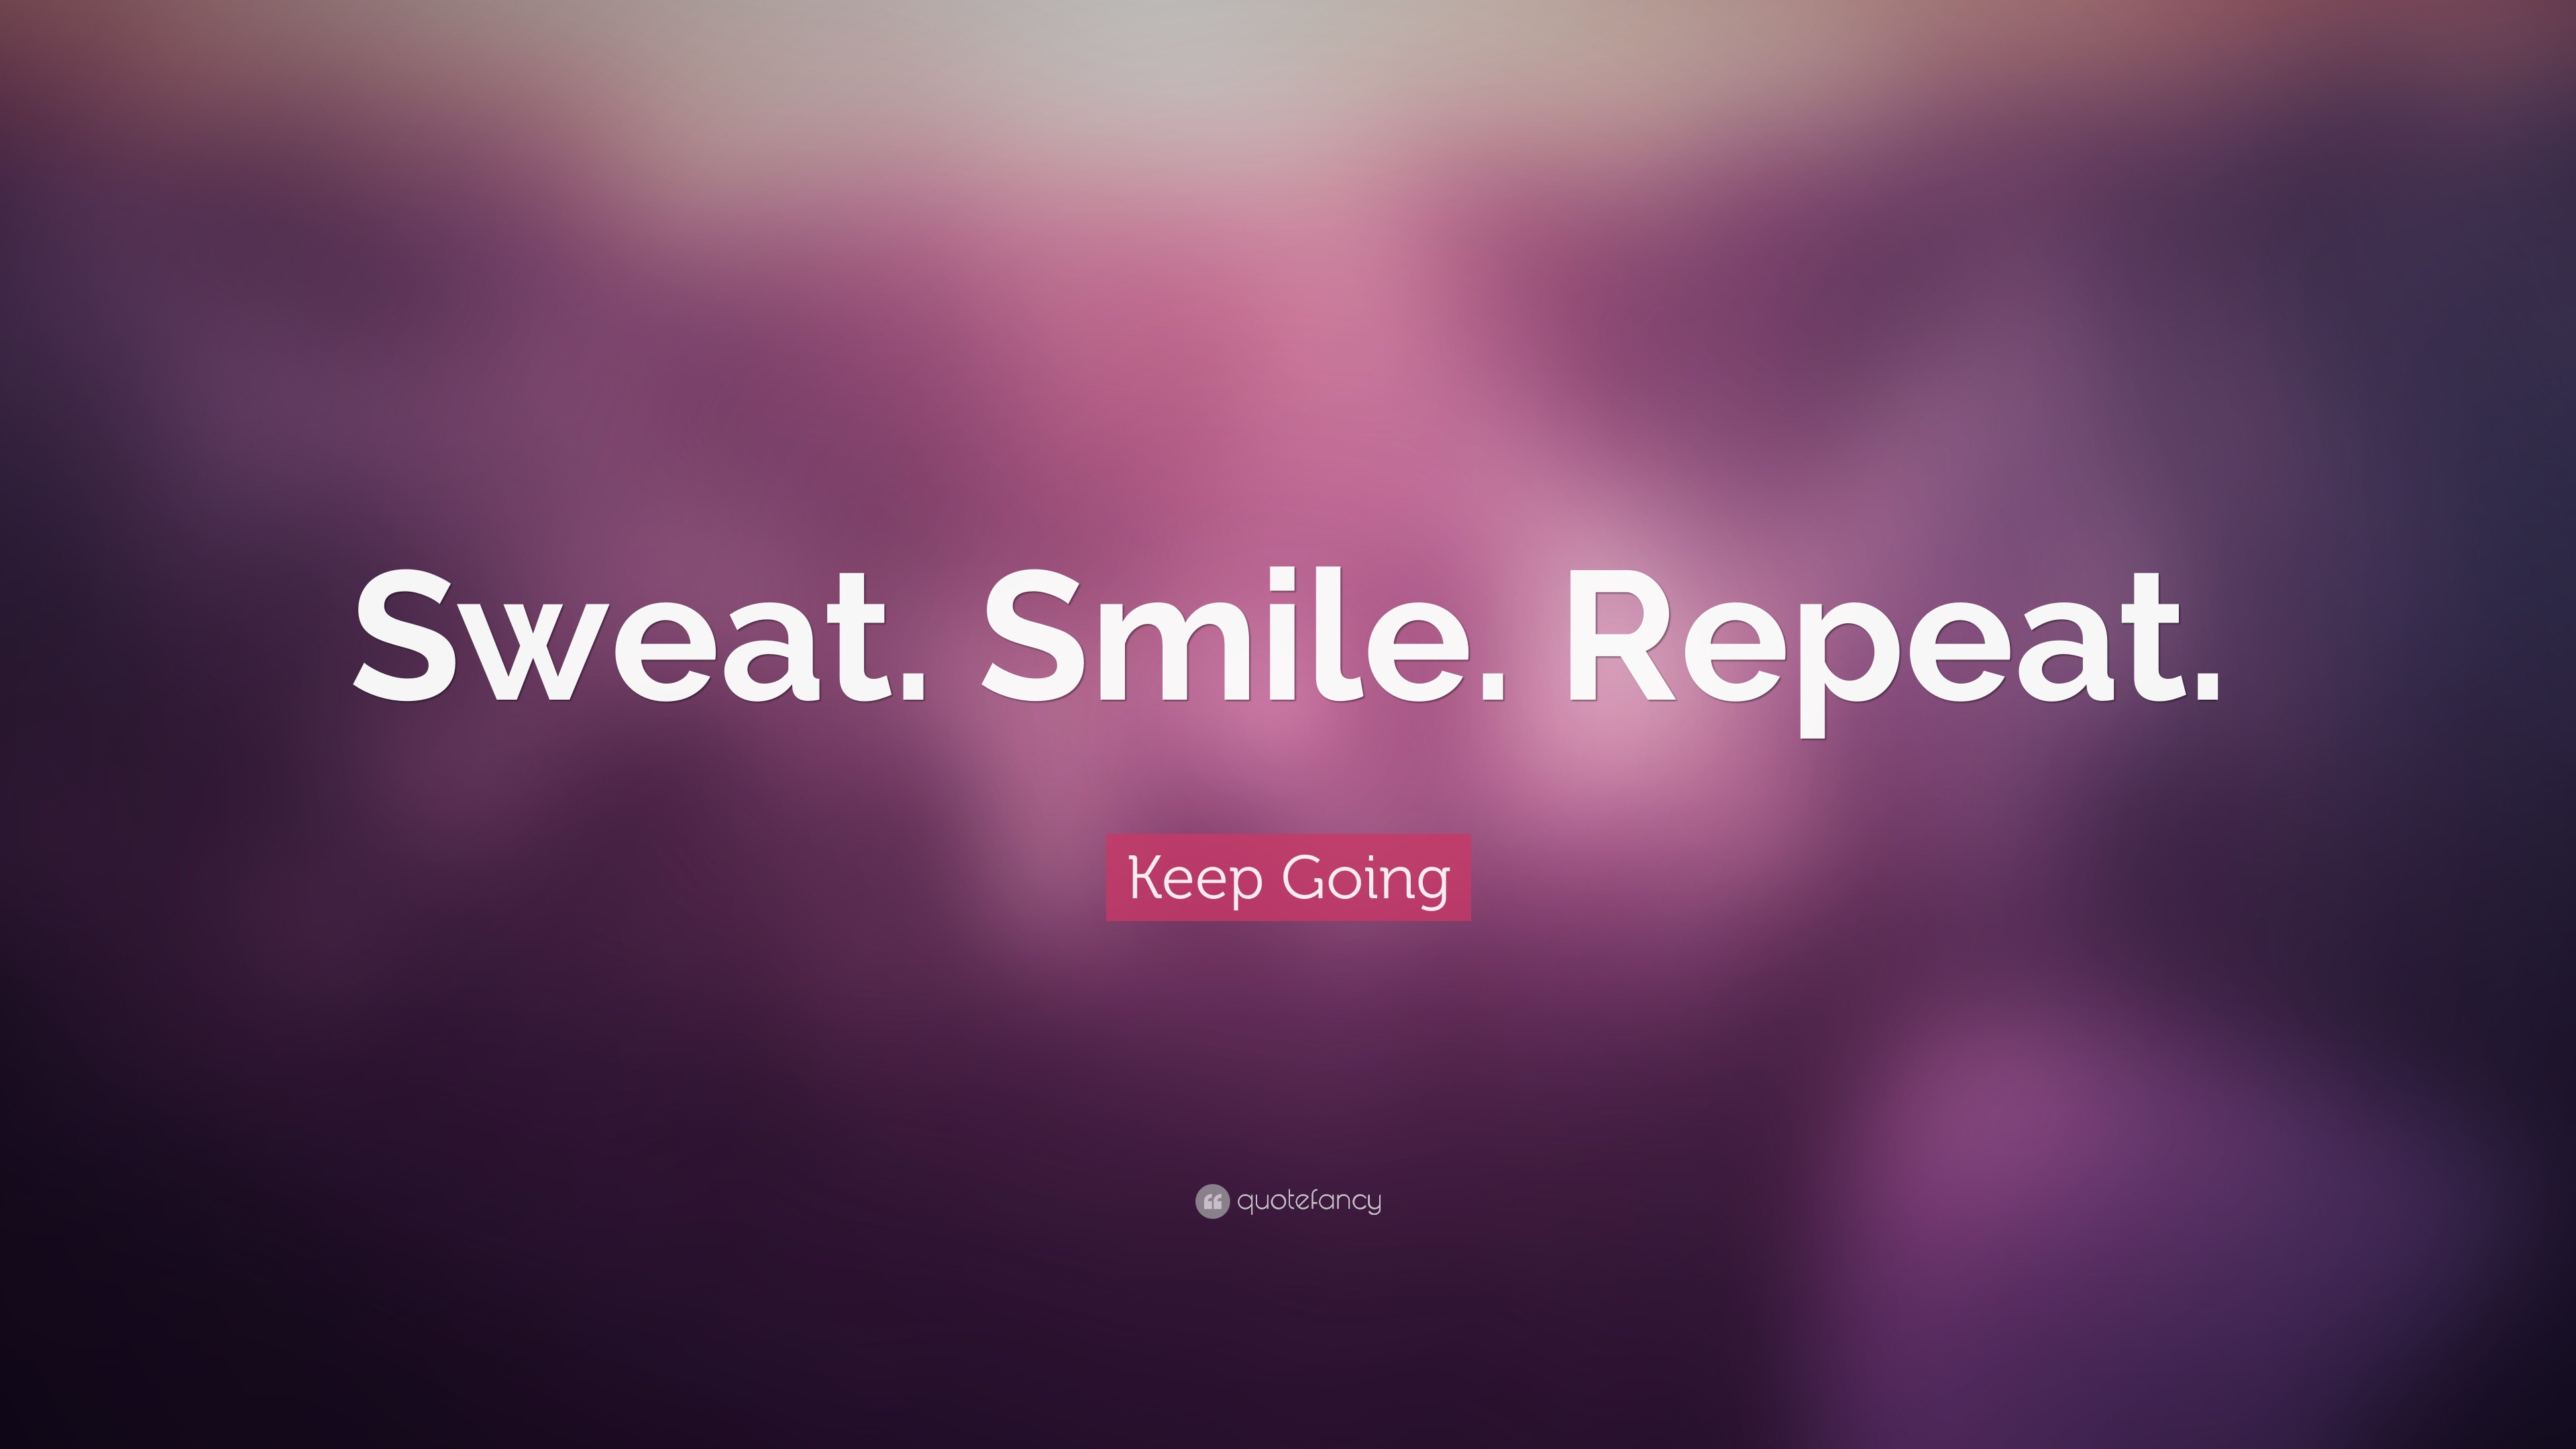 Keep Going Quote: “Sweat. Smile. Repeat.”